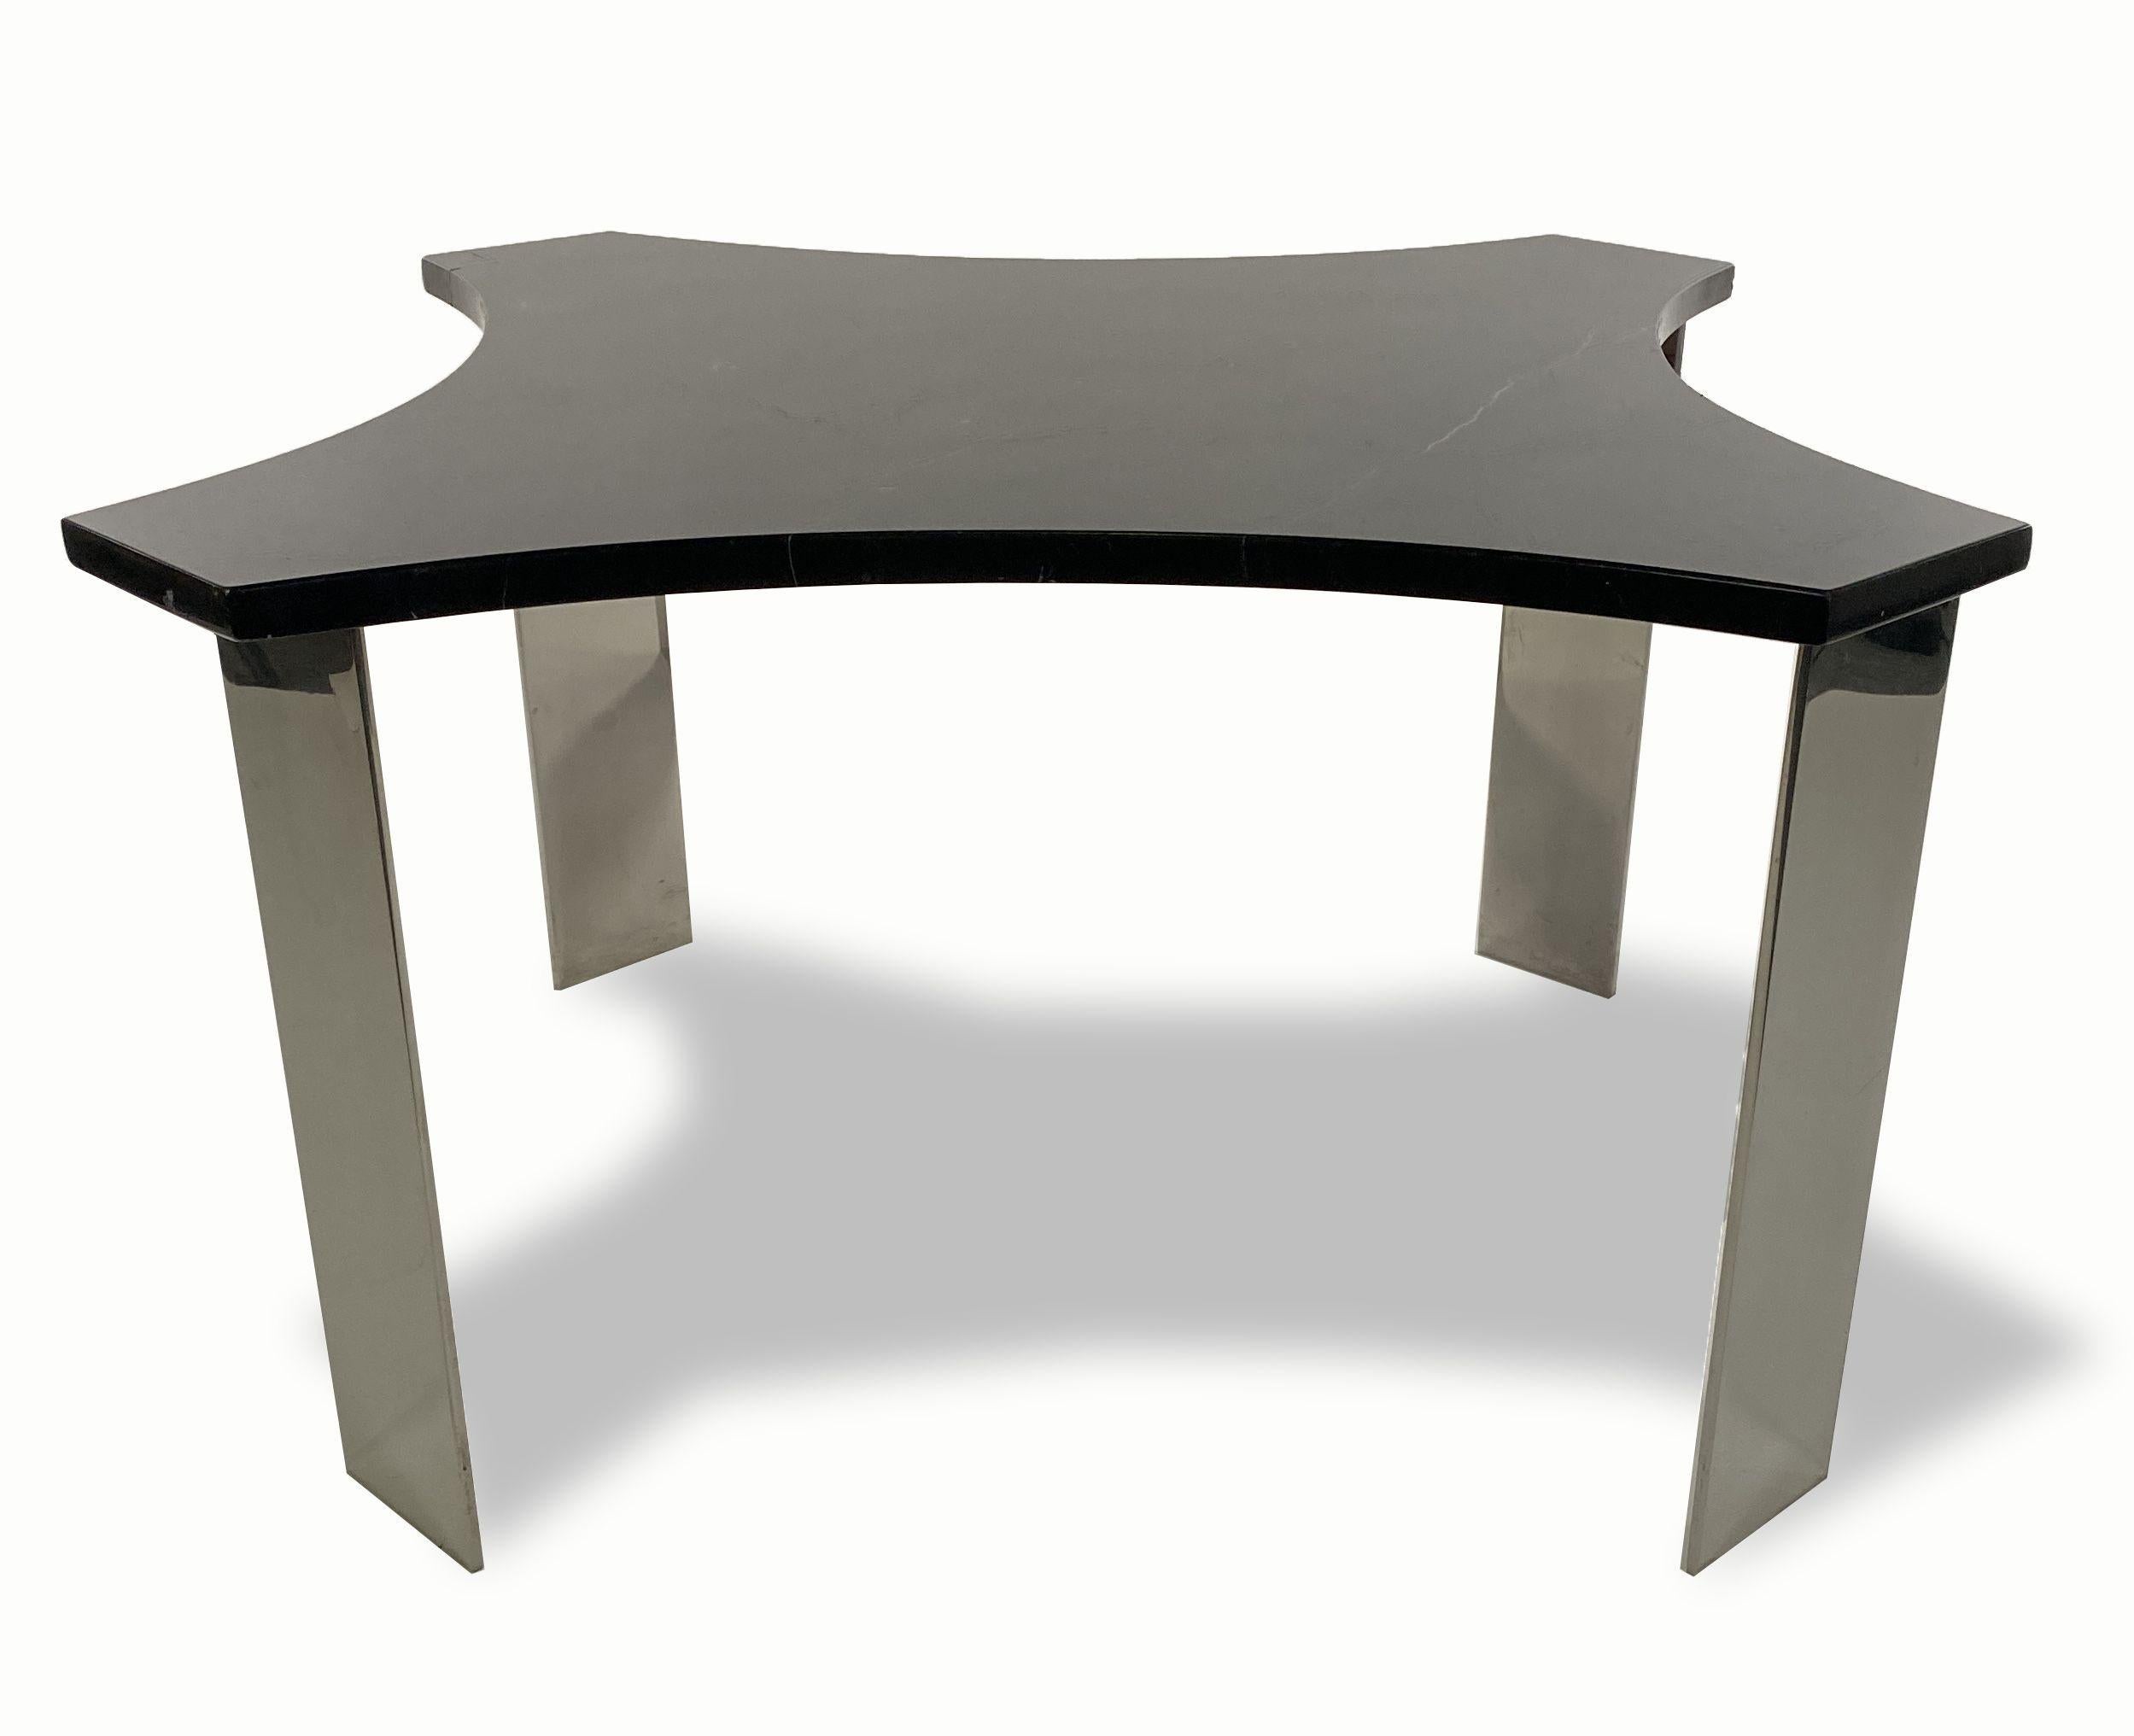 The stylized star shaped black granite top above a framework supporting polished steel rectangular legs.